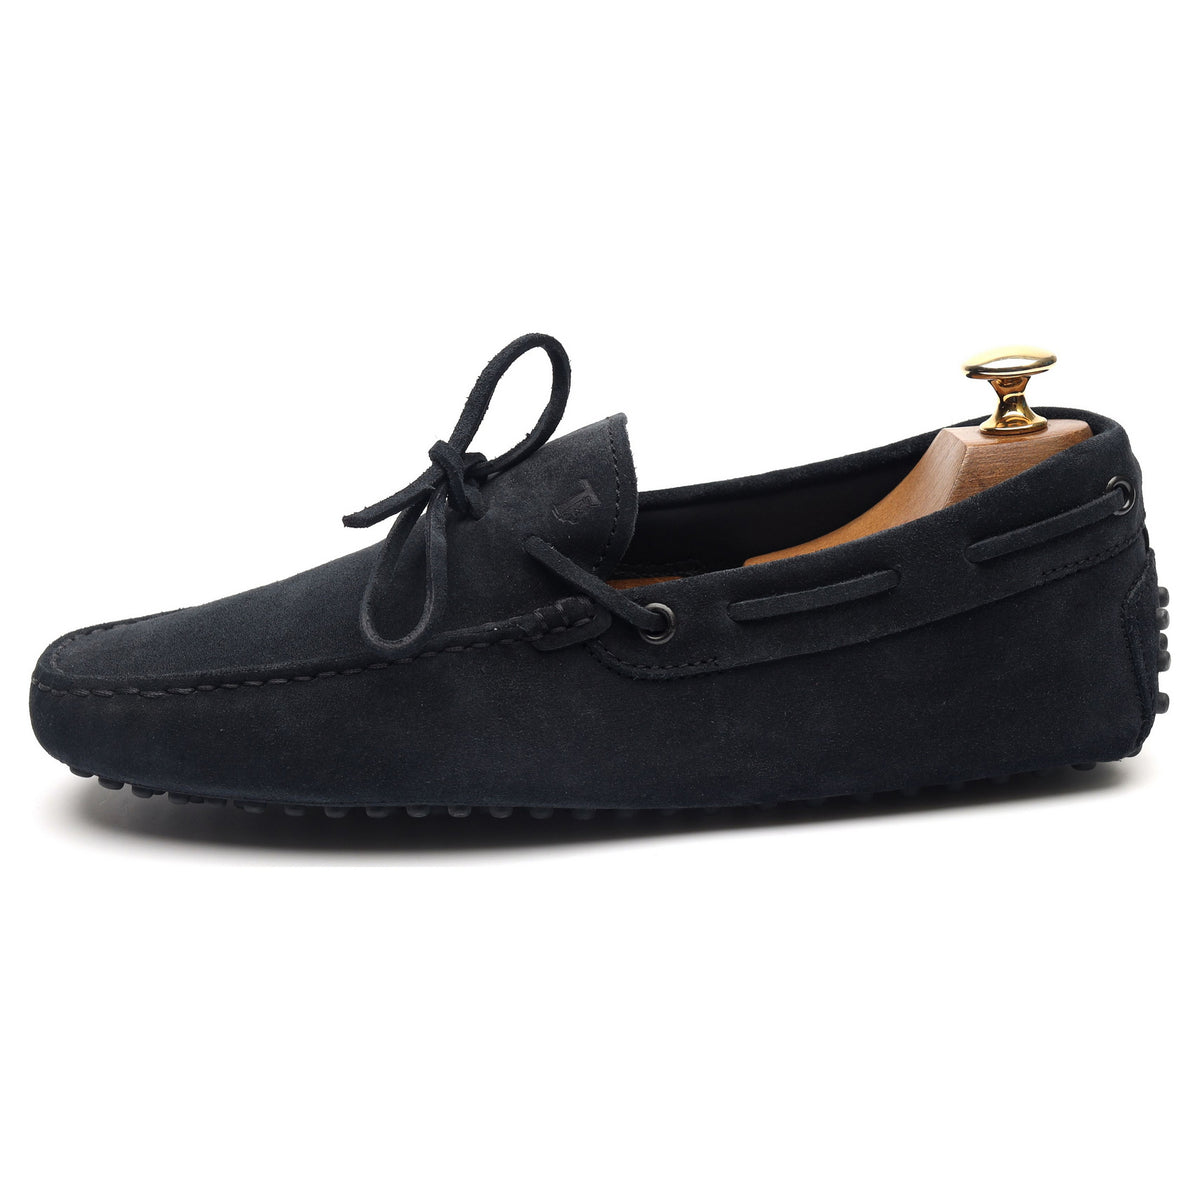 Gommino Navy Blue Suede Driving Loafers UK 6